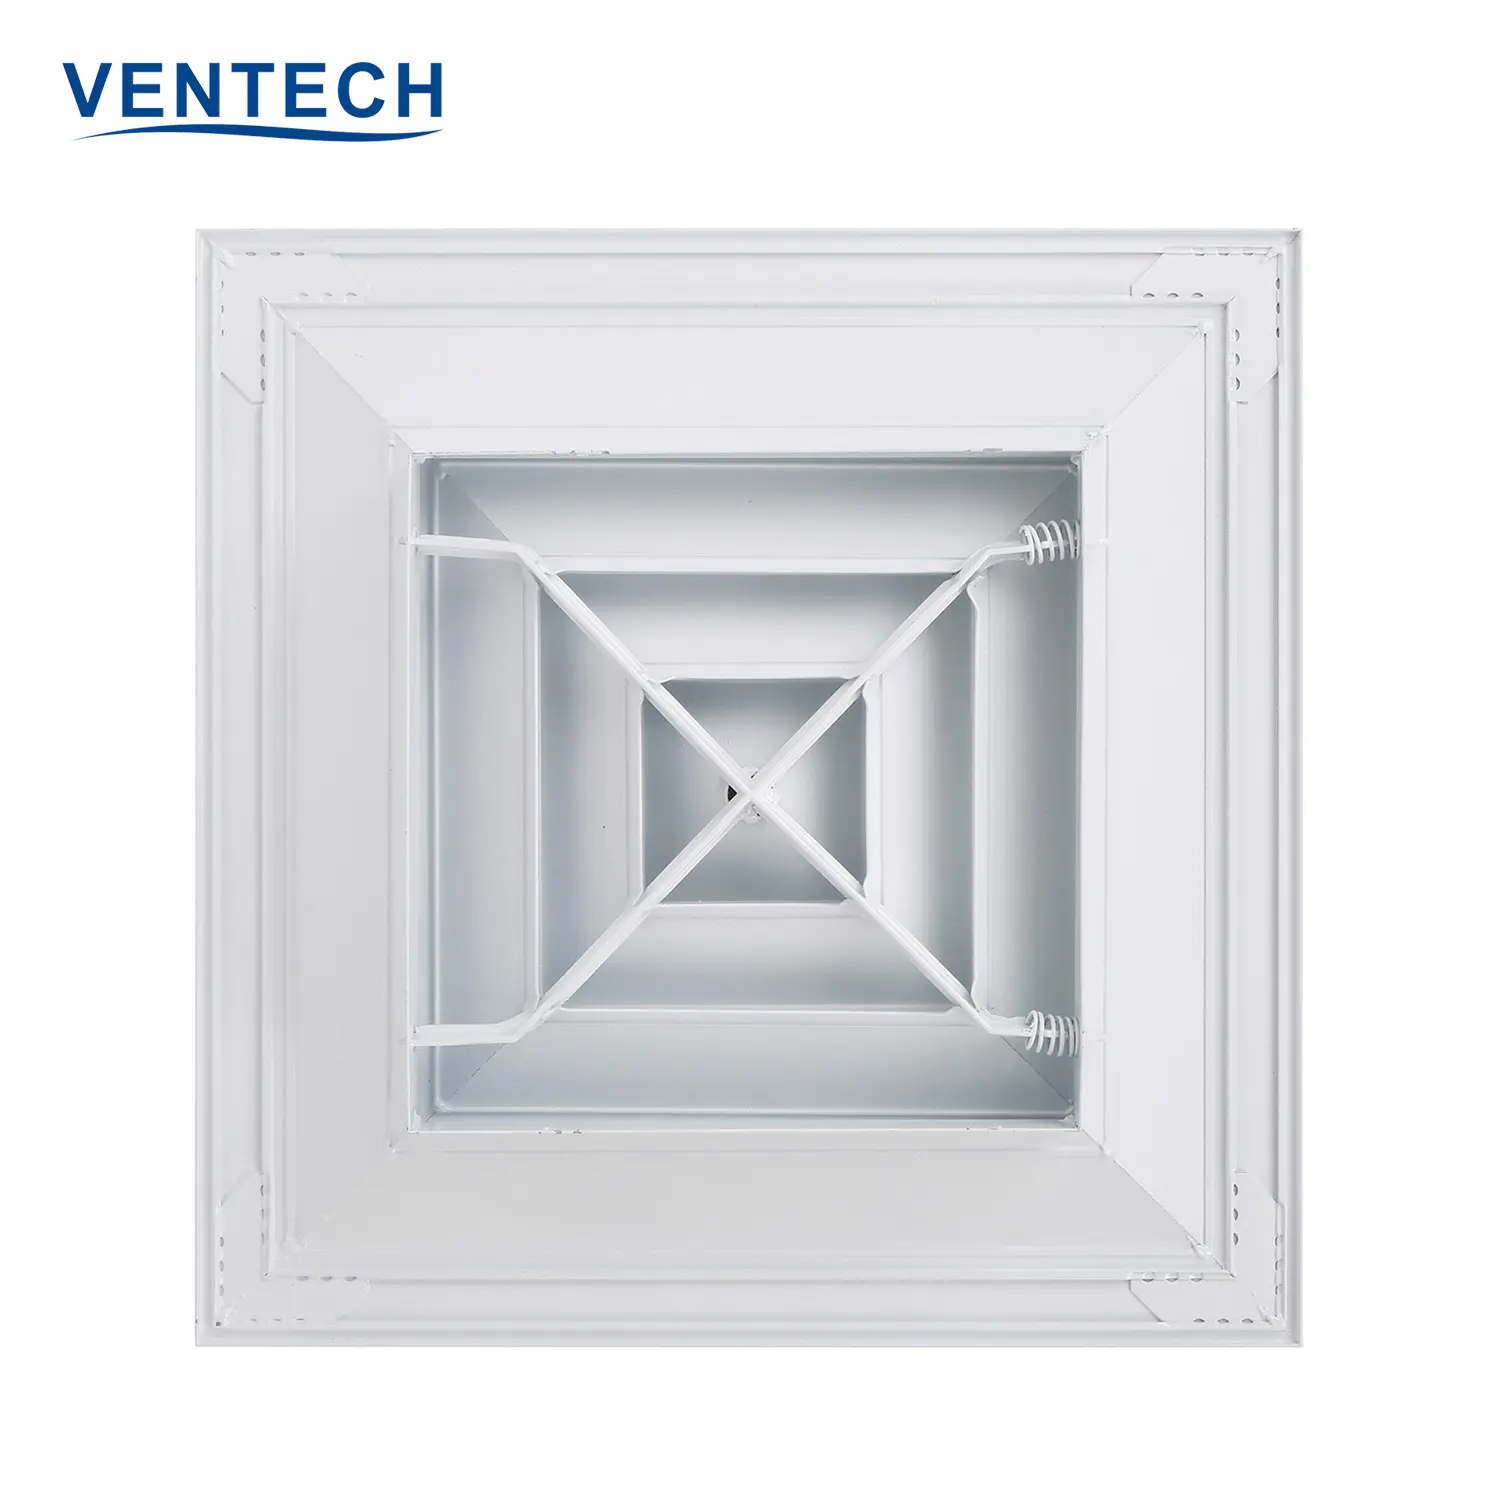 Hvac System Exhaust 4way Air Outlet Aluminum Conditioning Square Ceiling Air Duct Diffuser